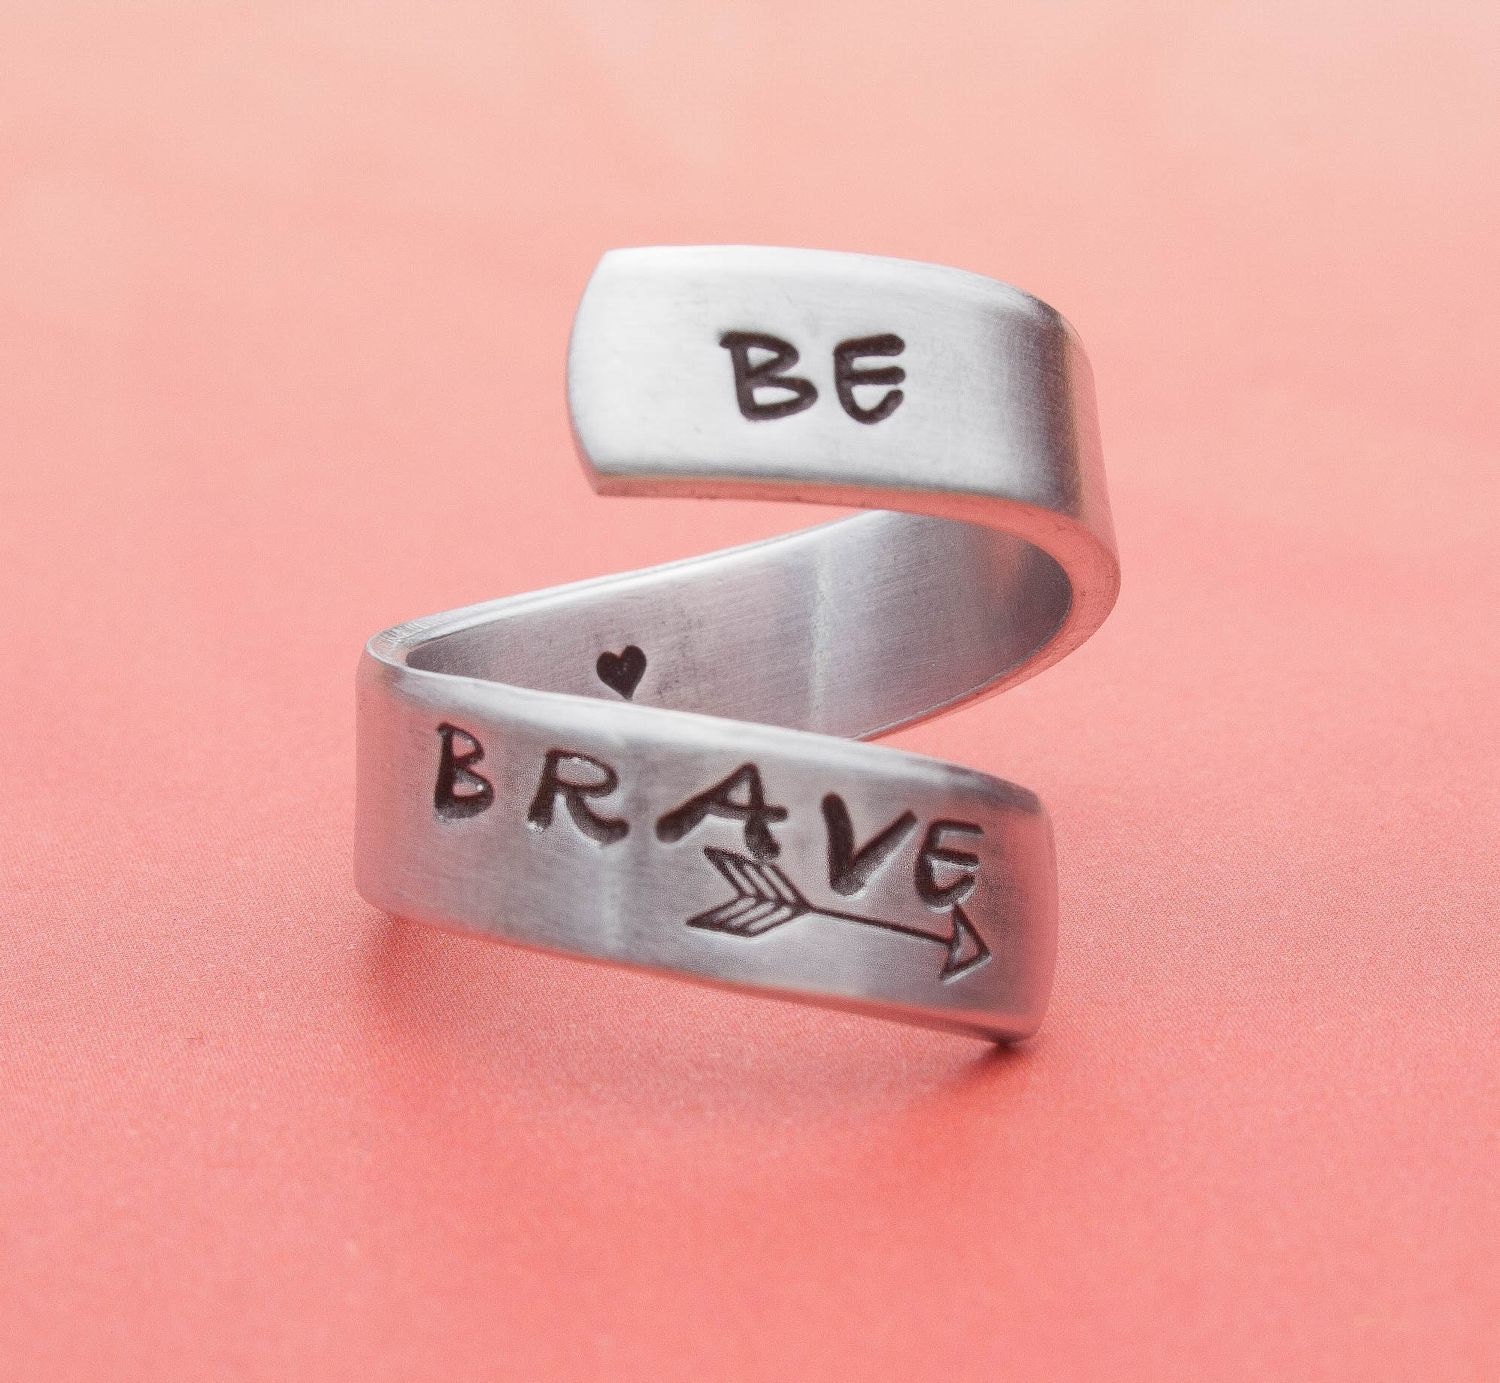 Inspirational Ring, Be Brave Ring, Brave Ring, Hand Stamped Ring, Quote Ring, Mantra Ring, Gift for Her, Birthday Gift, Handmade Jewelry